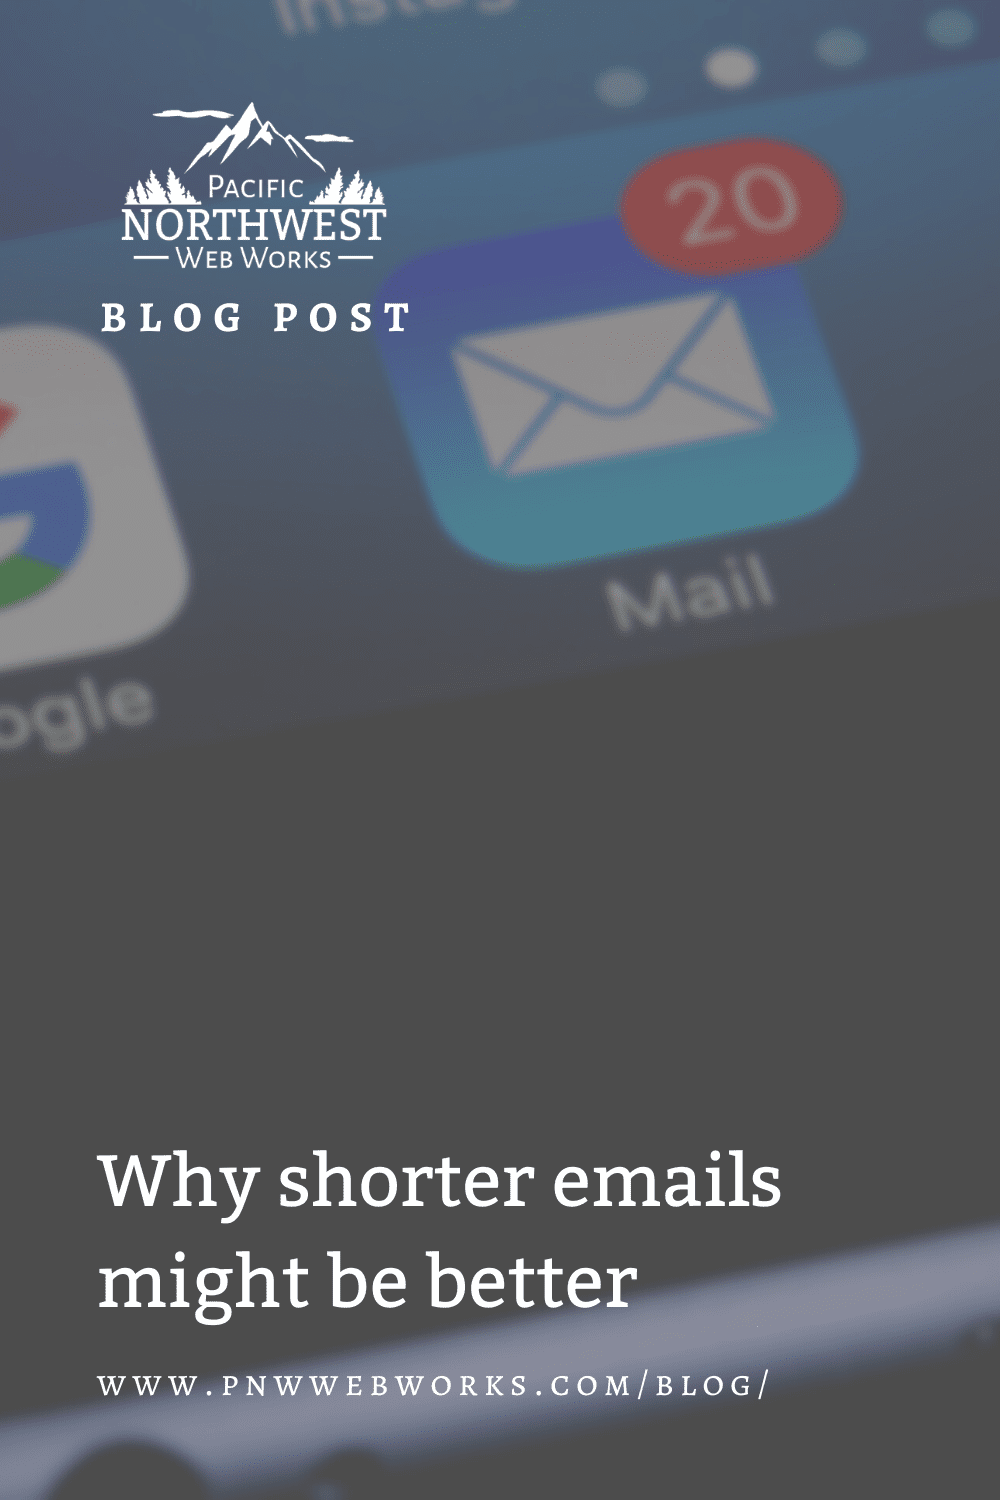 Why shorter emails might be better